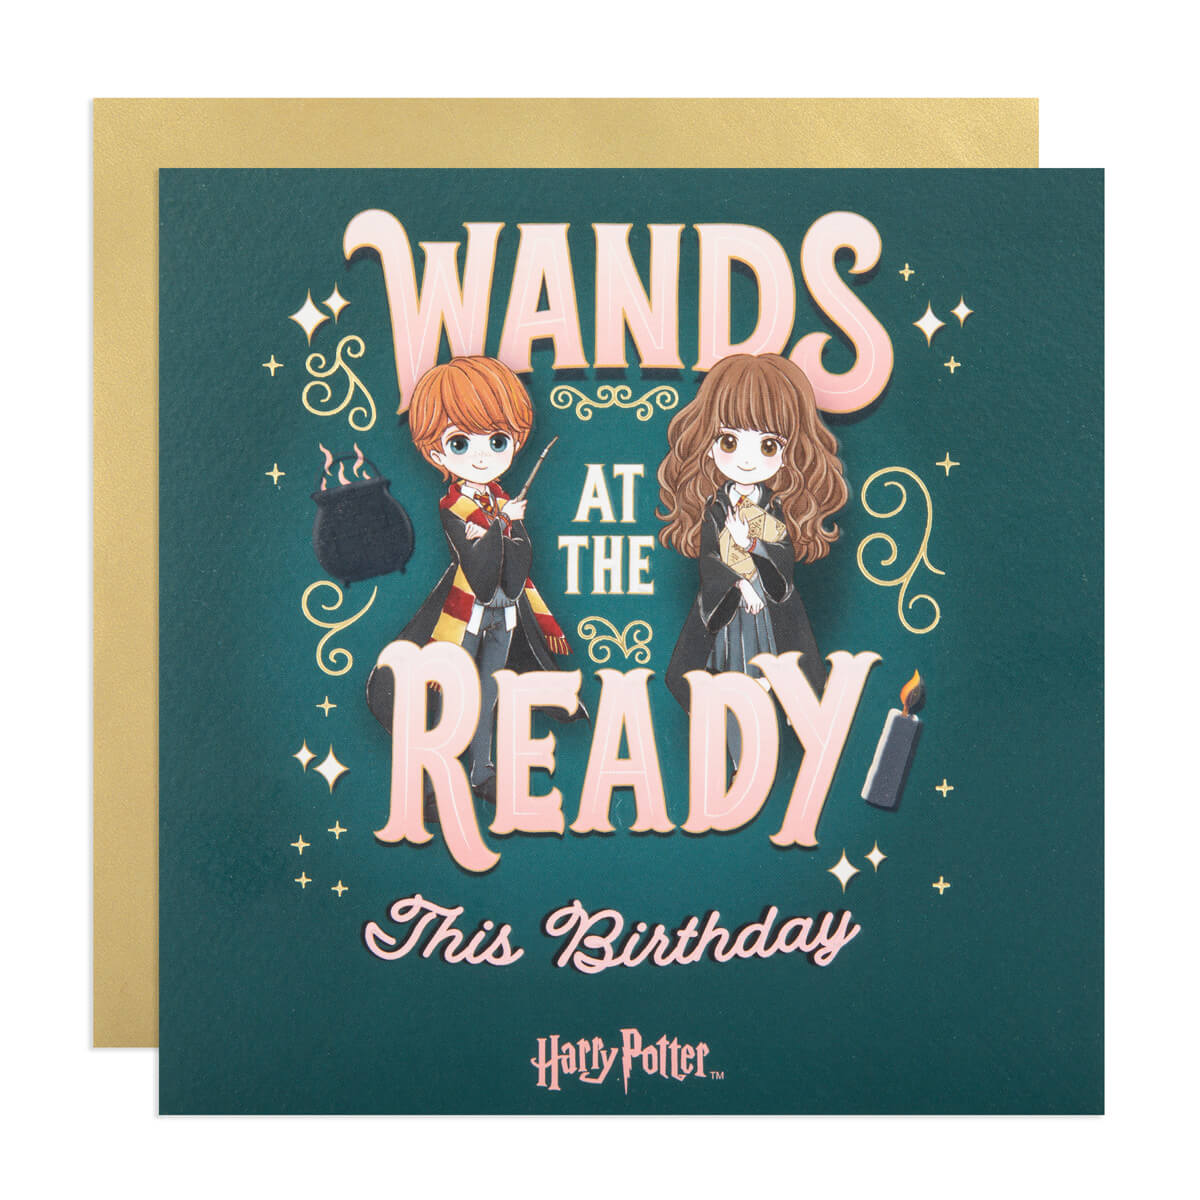 Harry Potter Birthday Card with Anime Characters of Hermione and Ron Weasley.  Card reads 'Wands At The Ready This Birthday'